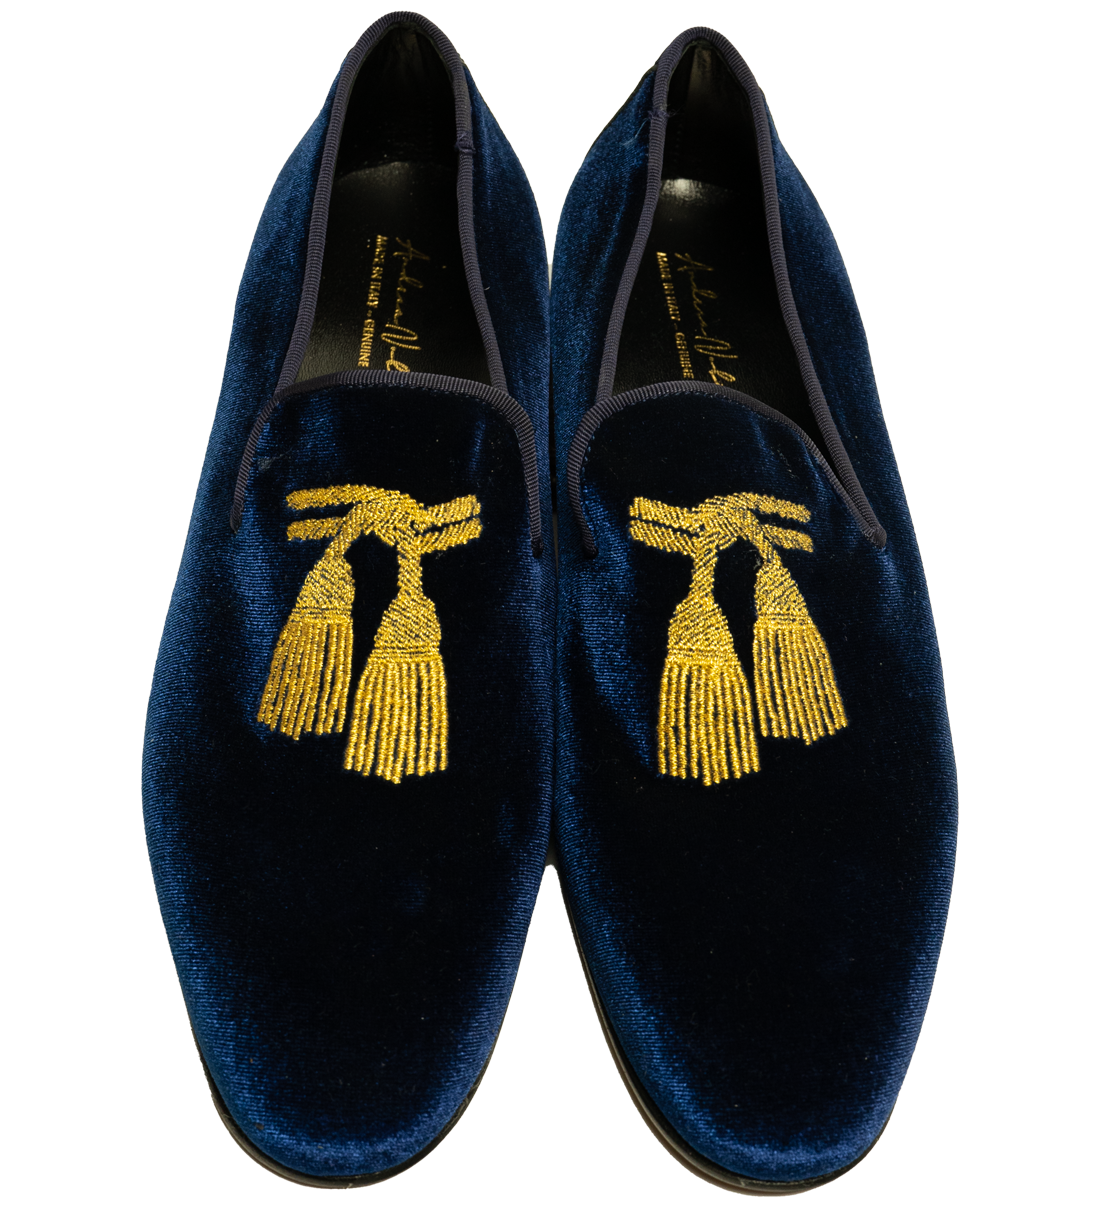 Andrea Nobile -  Navy Blue Suede Loafers with Tassel Embroidery